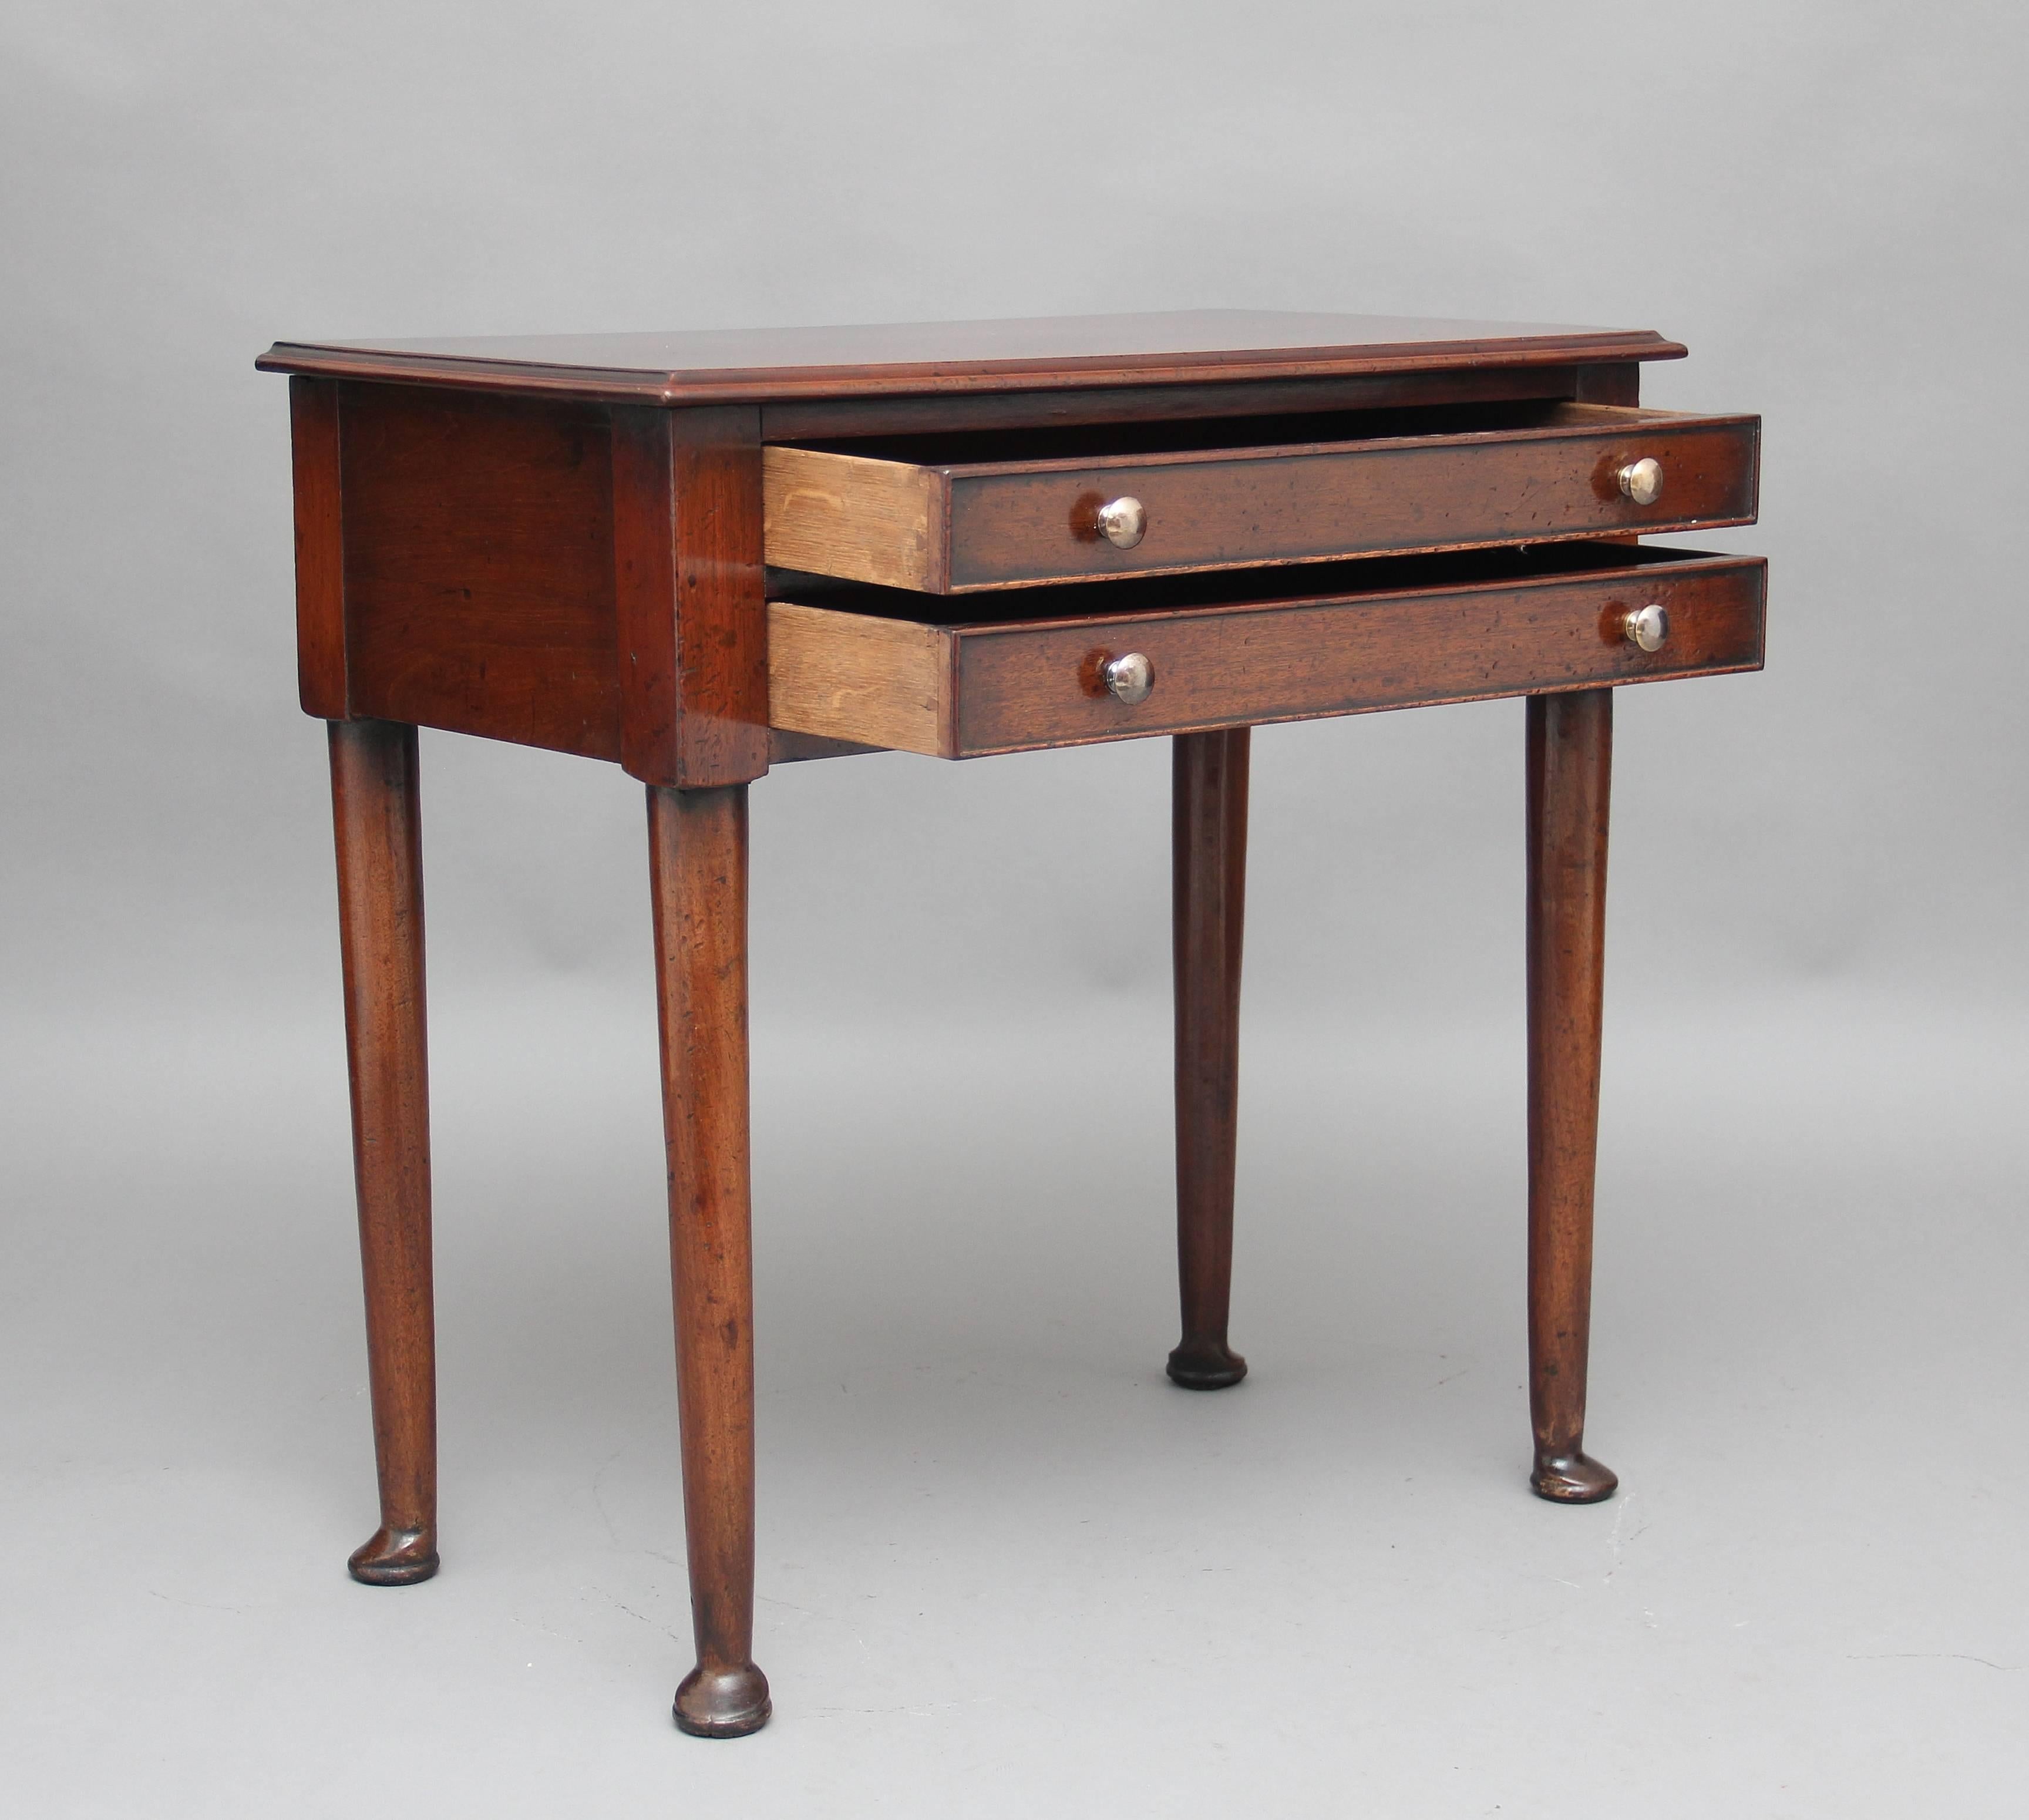 Early 20th Century mahogany side / occasional table  of nice proportions, the moulded edge top above two oak lined drawers with brass knob handles, supported on turned legs terminating on a pad foot.  Circa 1920.  

